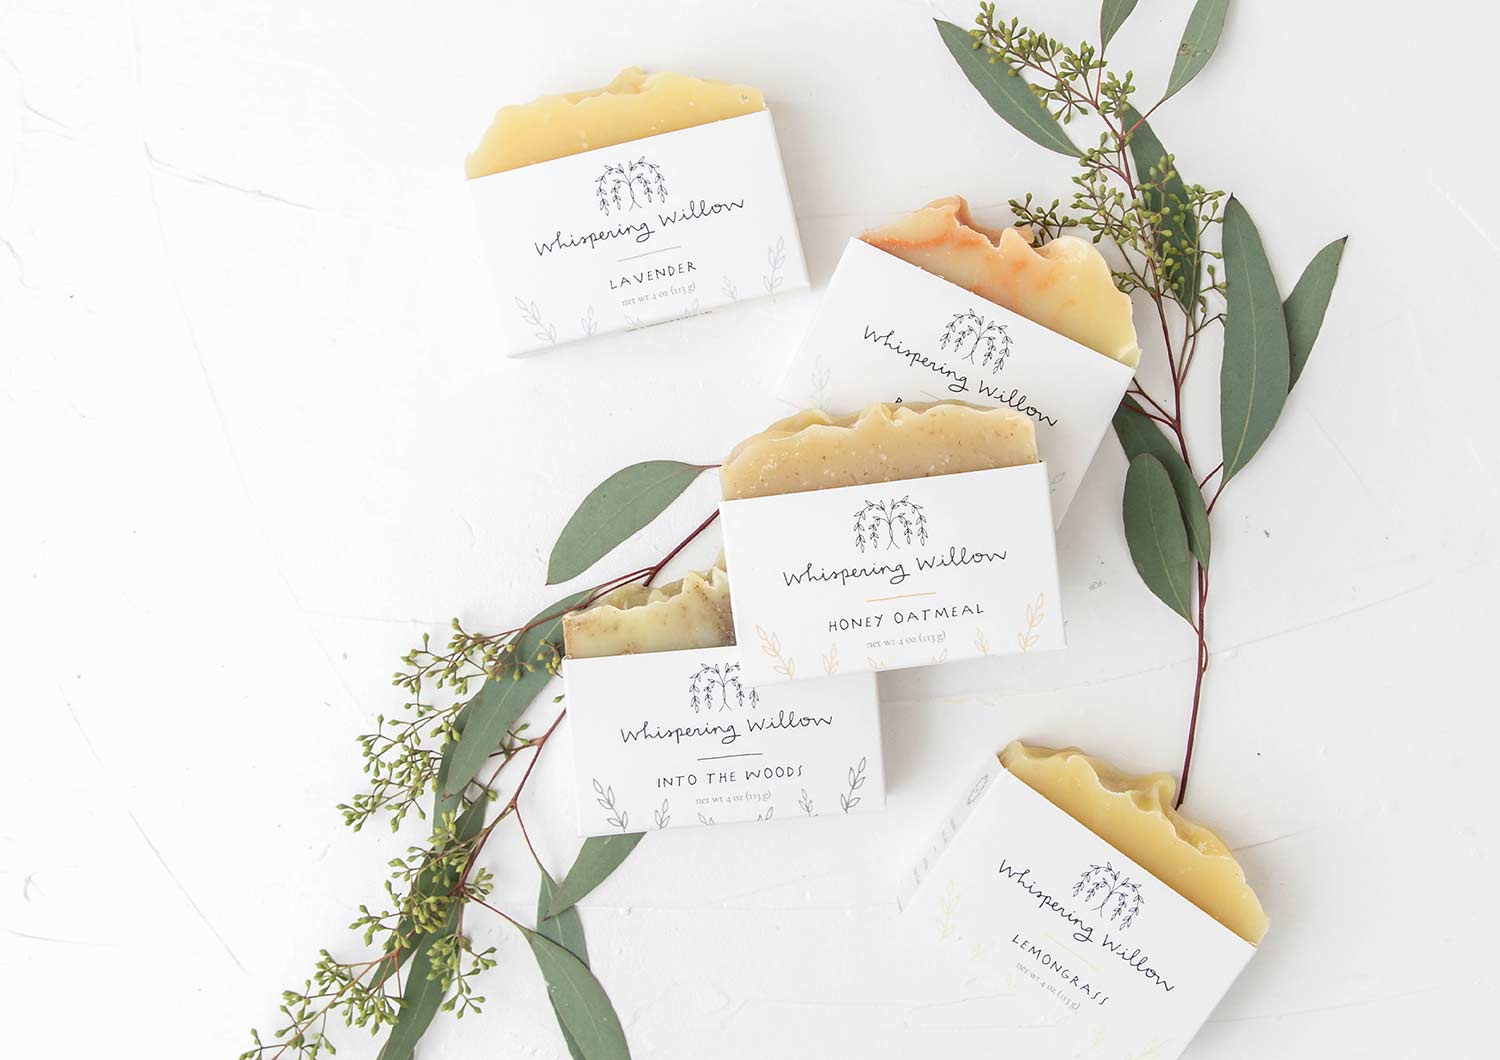 bars of whispering willow sustainable soap laying on leaves and twigs white background